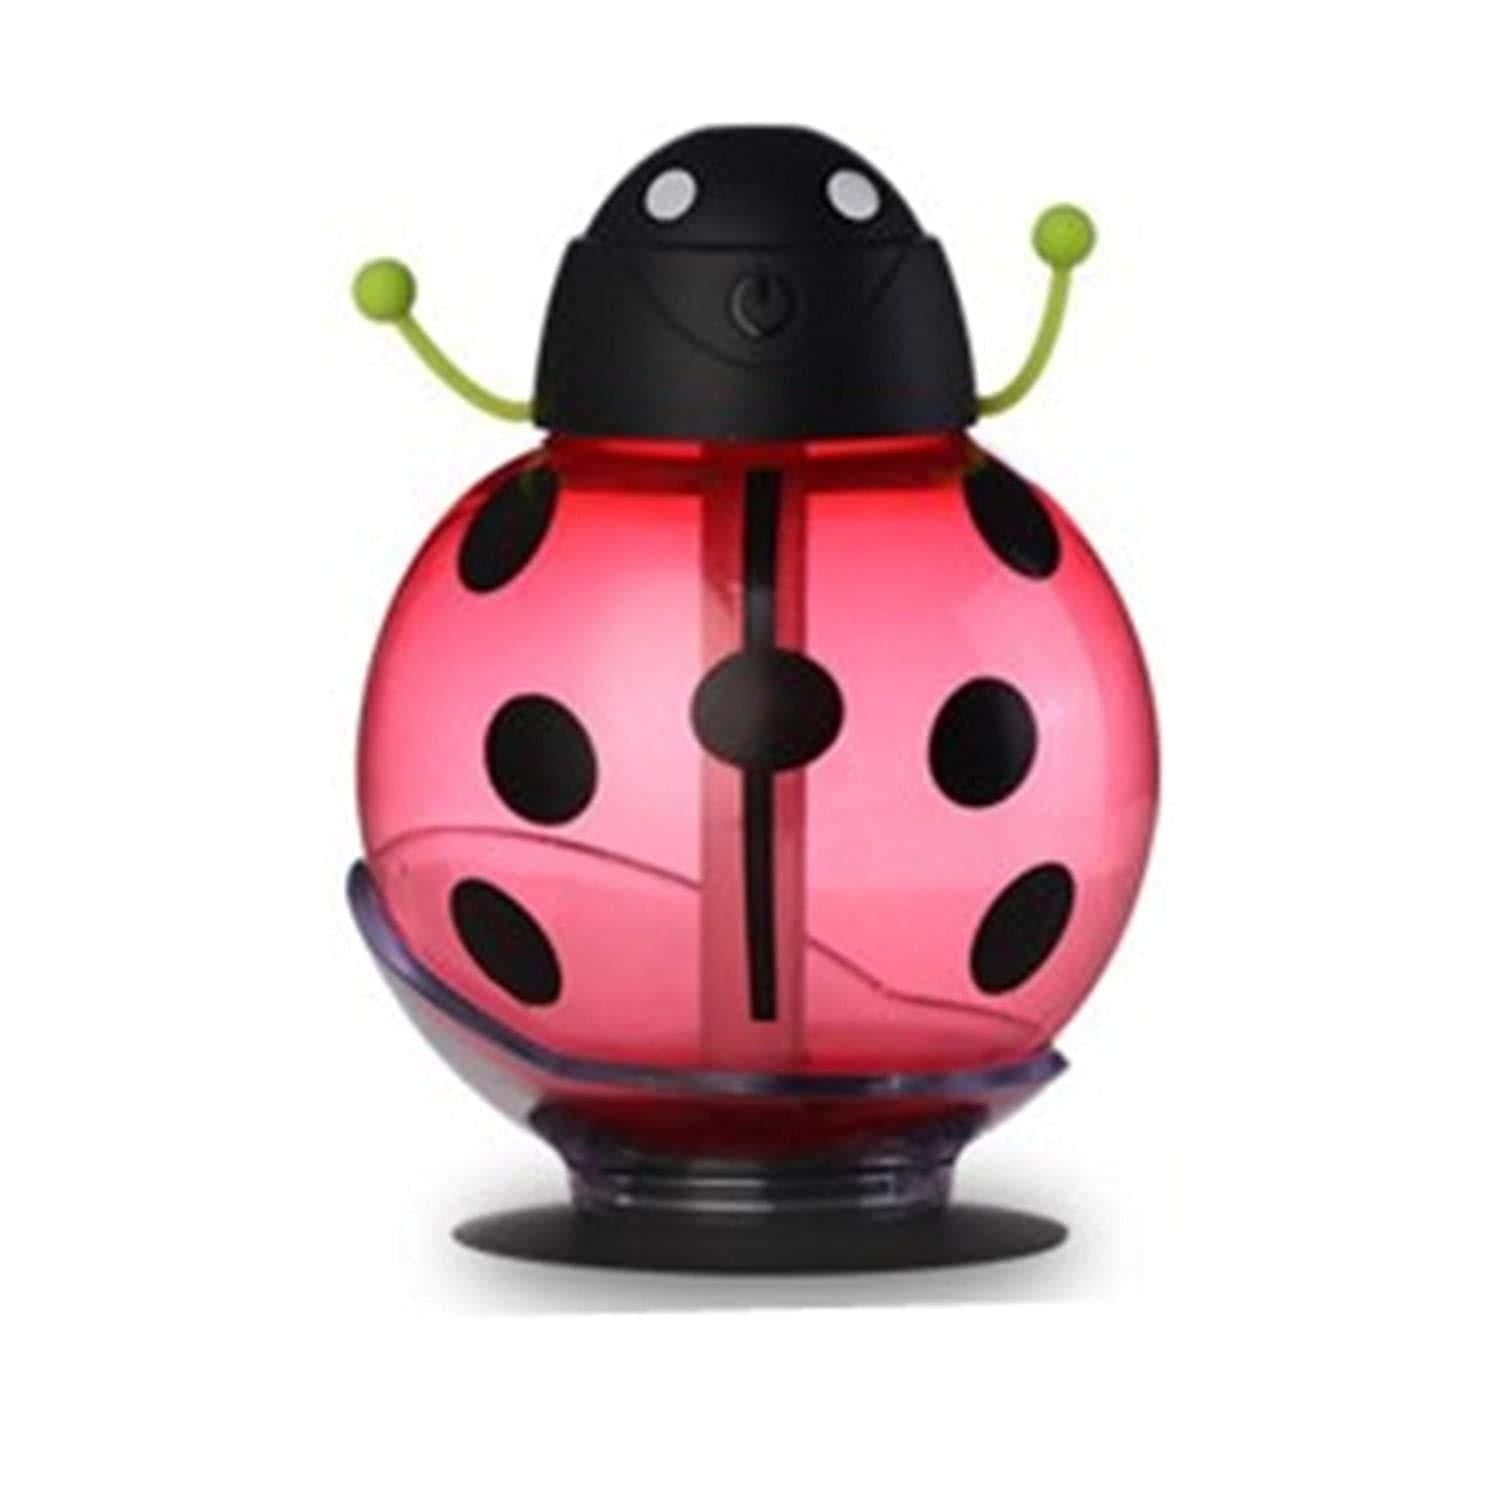 0371 Cute Beatles LED Light Humidifier Air Diffuser Purifier Atomizer Essential oil diffuser difusor de aroma mist maker fogger Gift - SkyShopy